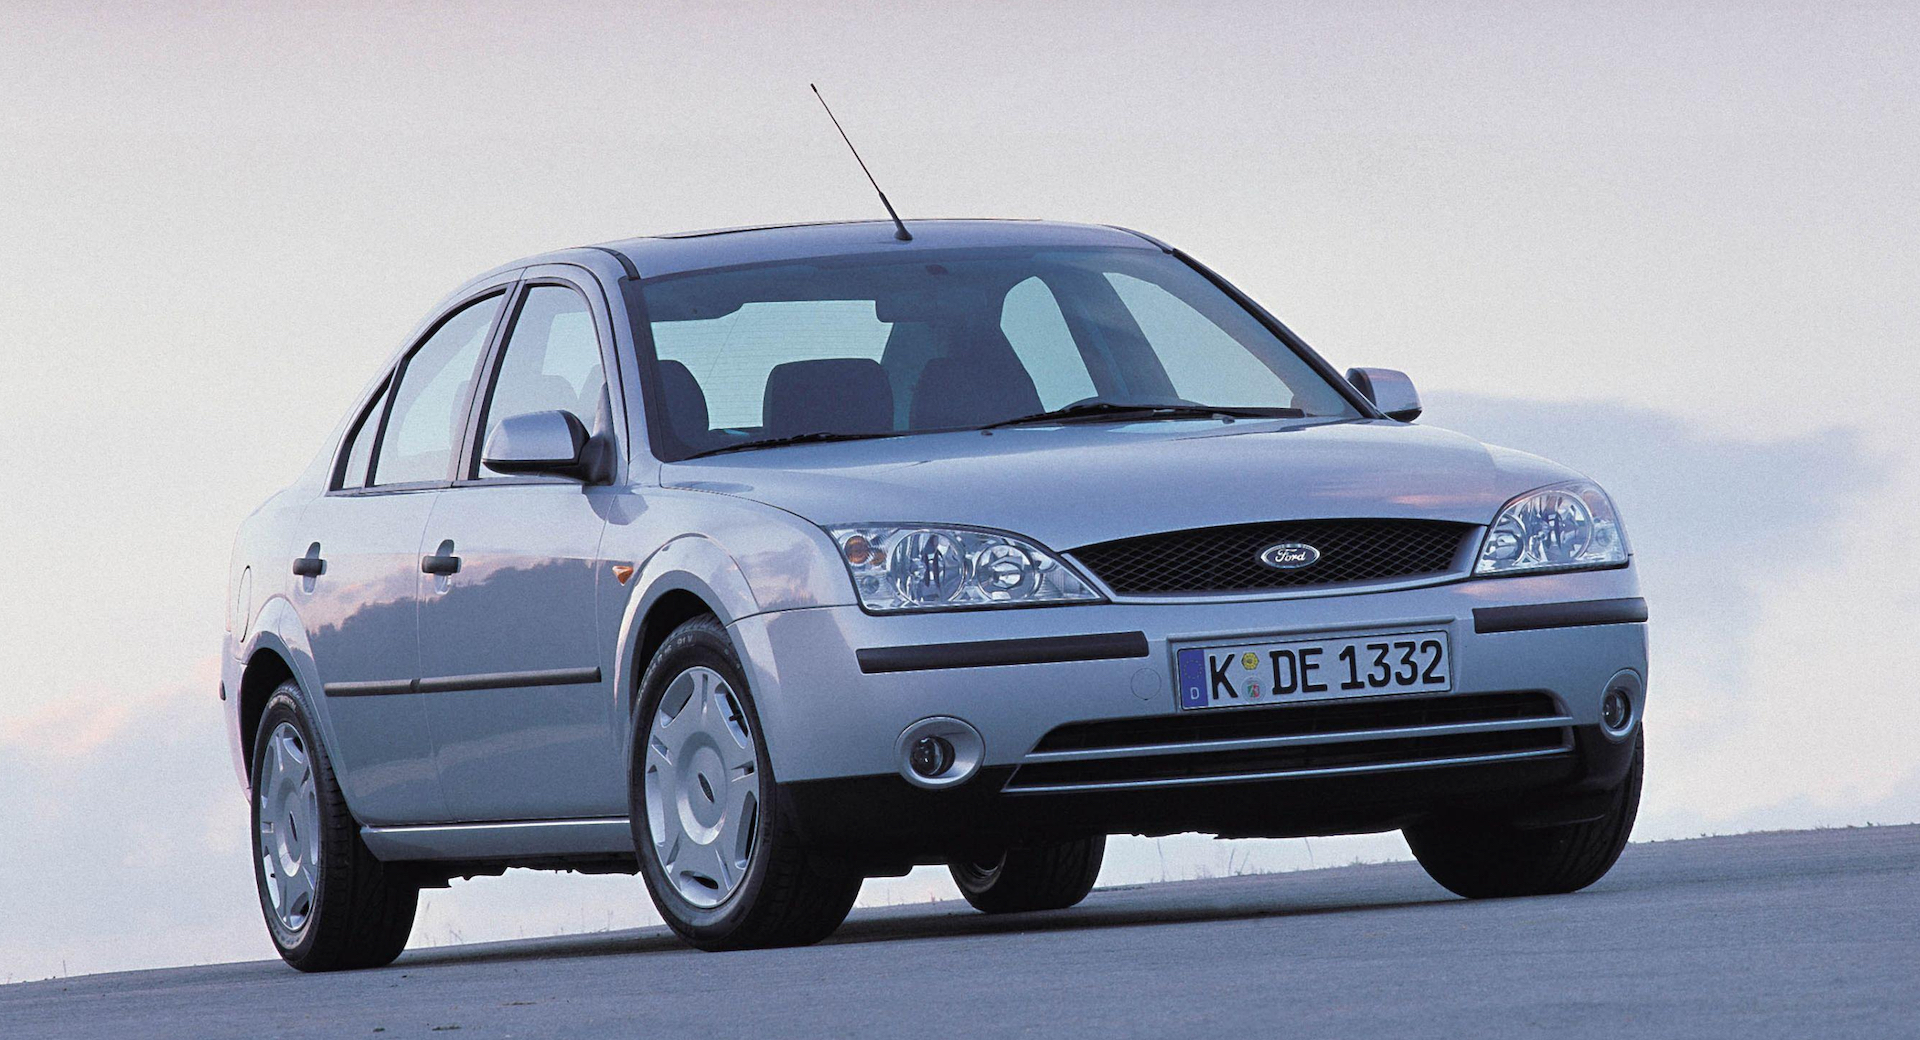 https://www.carscoops.com/wp-content/uploads/2022/01/Ford-Mondeo-2000.jpeg